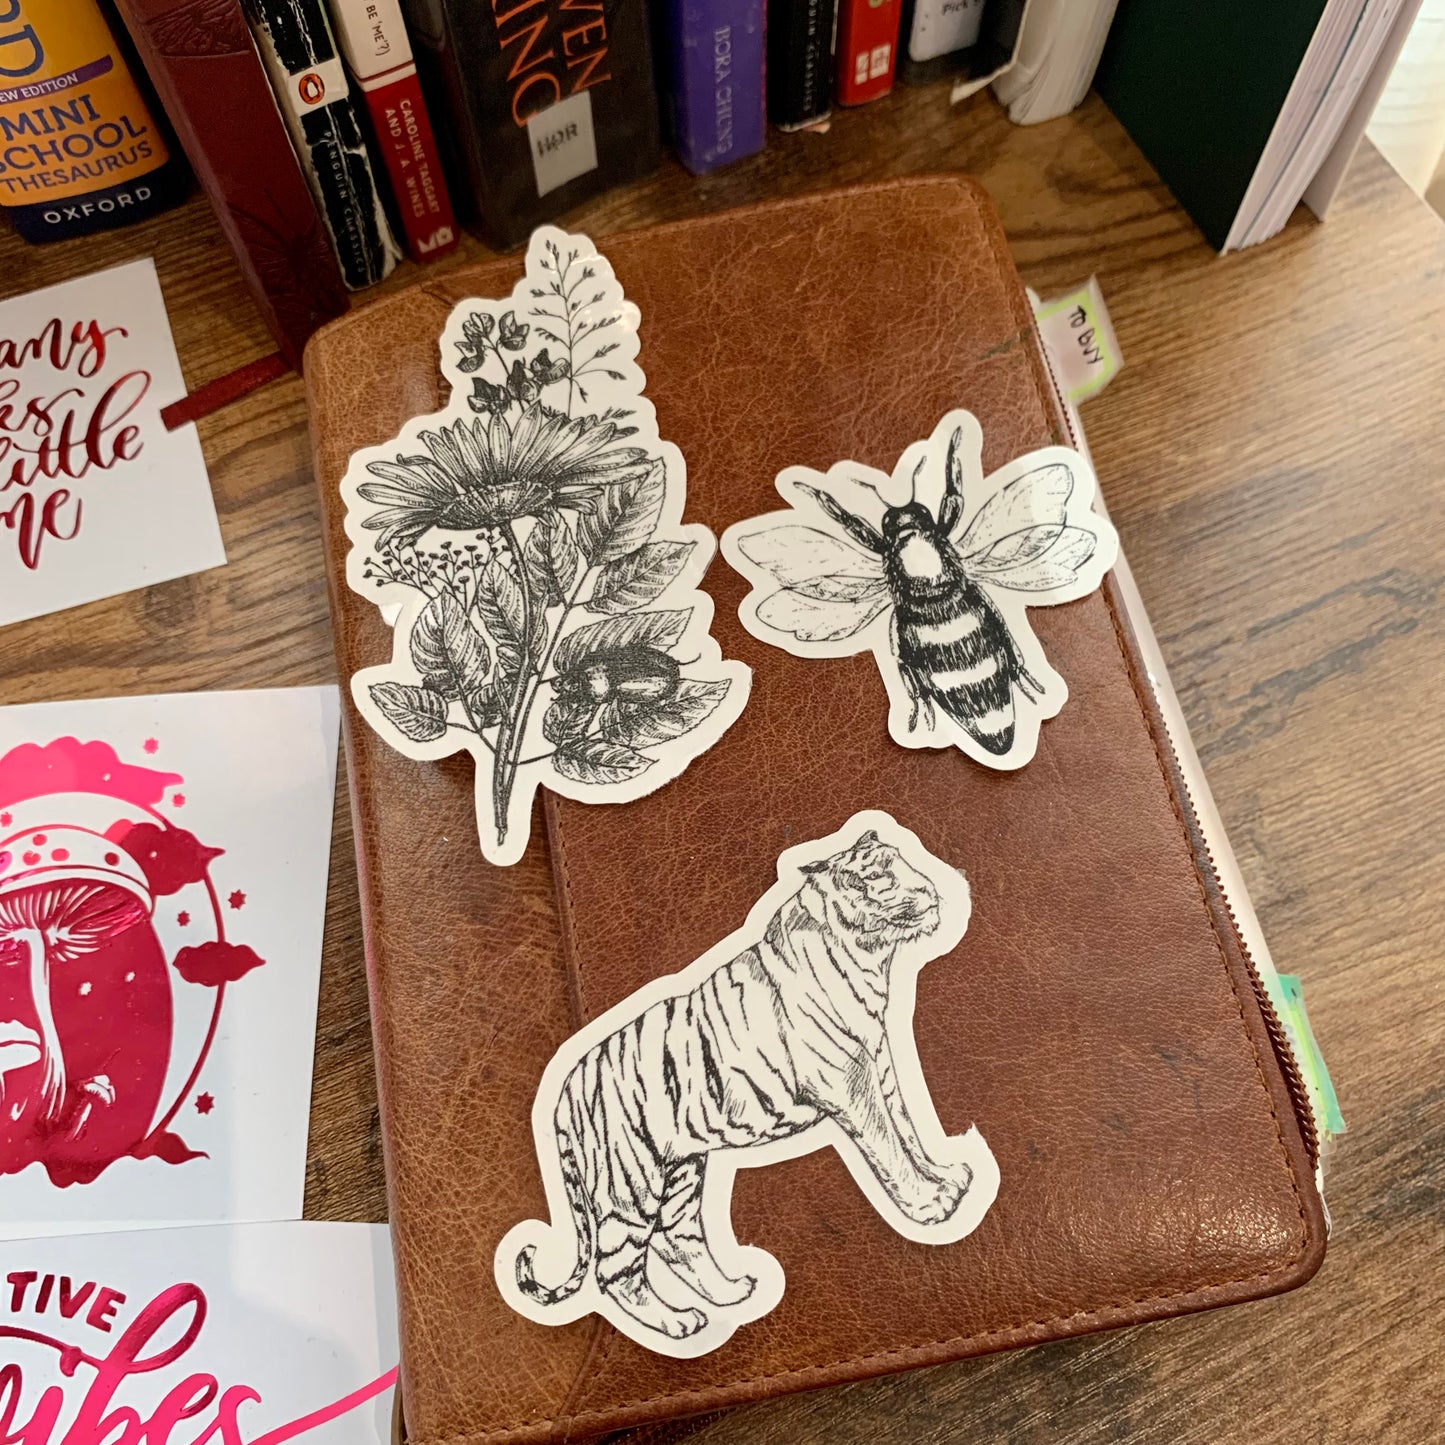 Large Vintage Sketch Stickers - Tiger, Bee & Bouquet - Set of 3 - Sweeter than Honey Collection